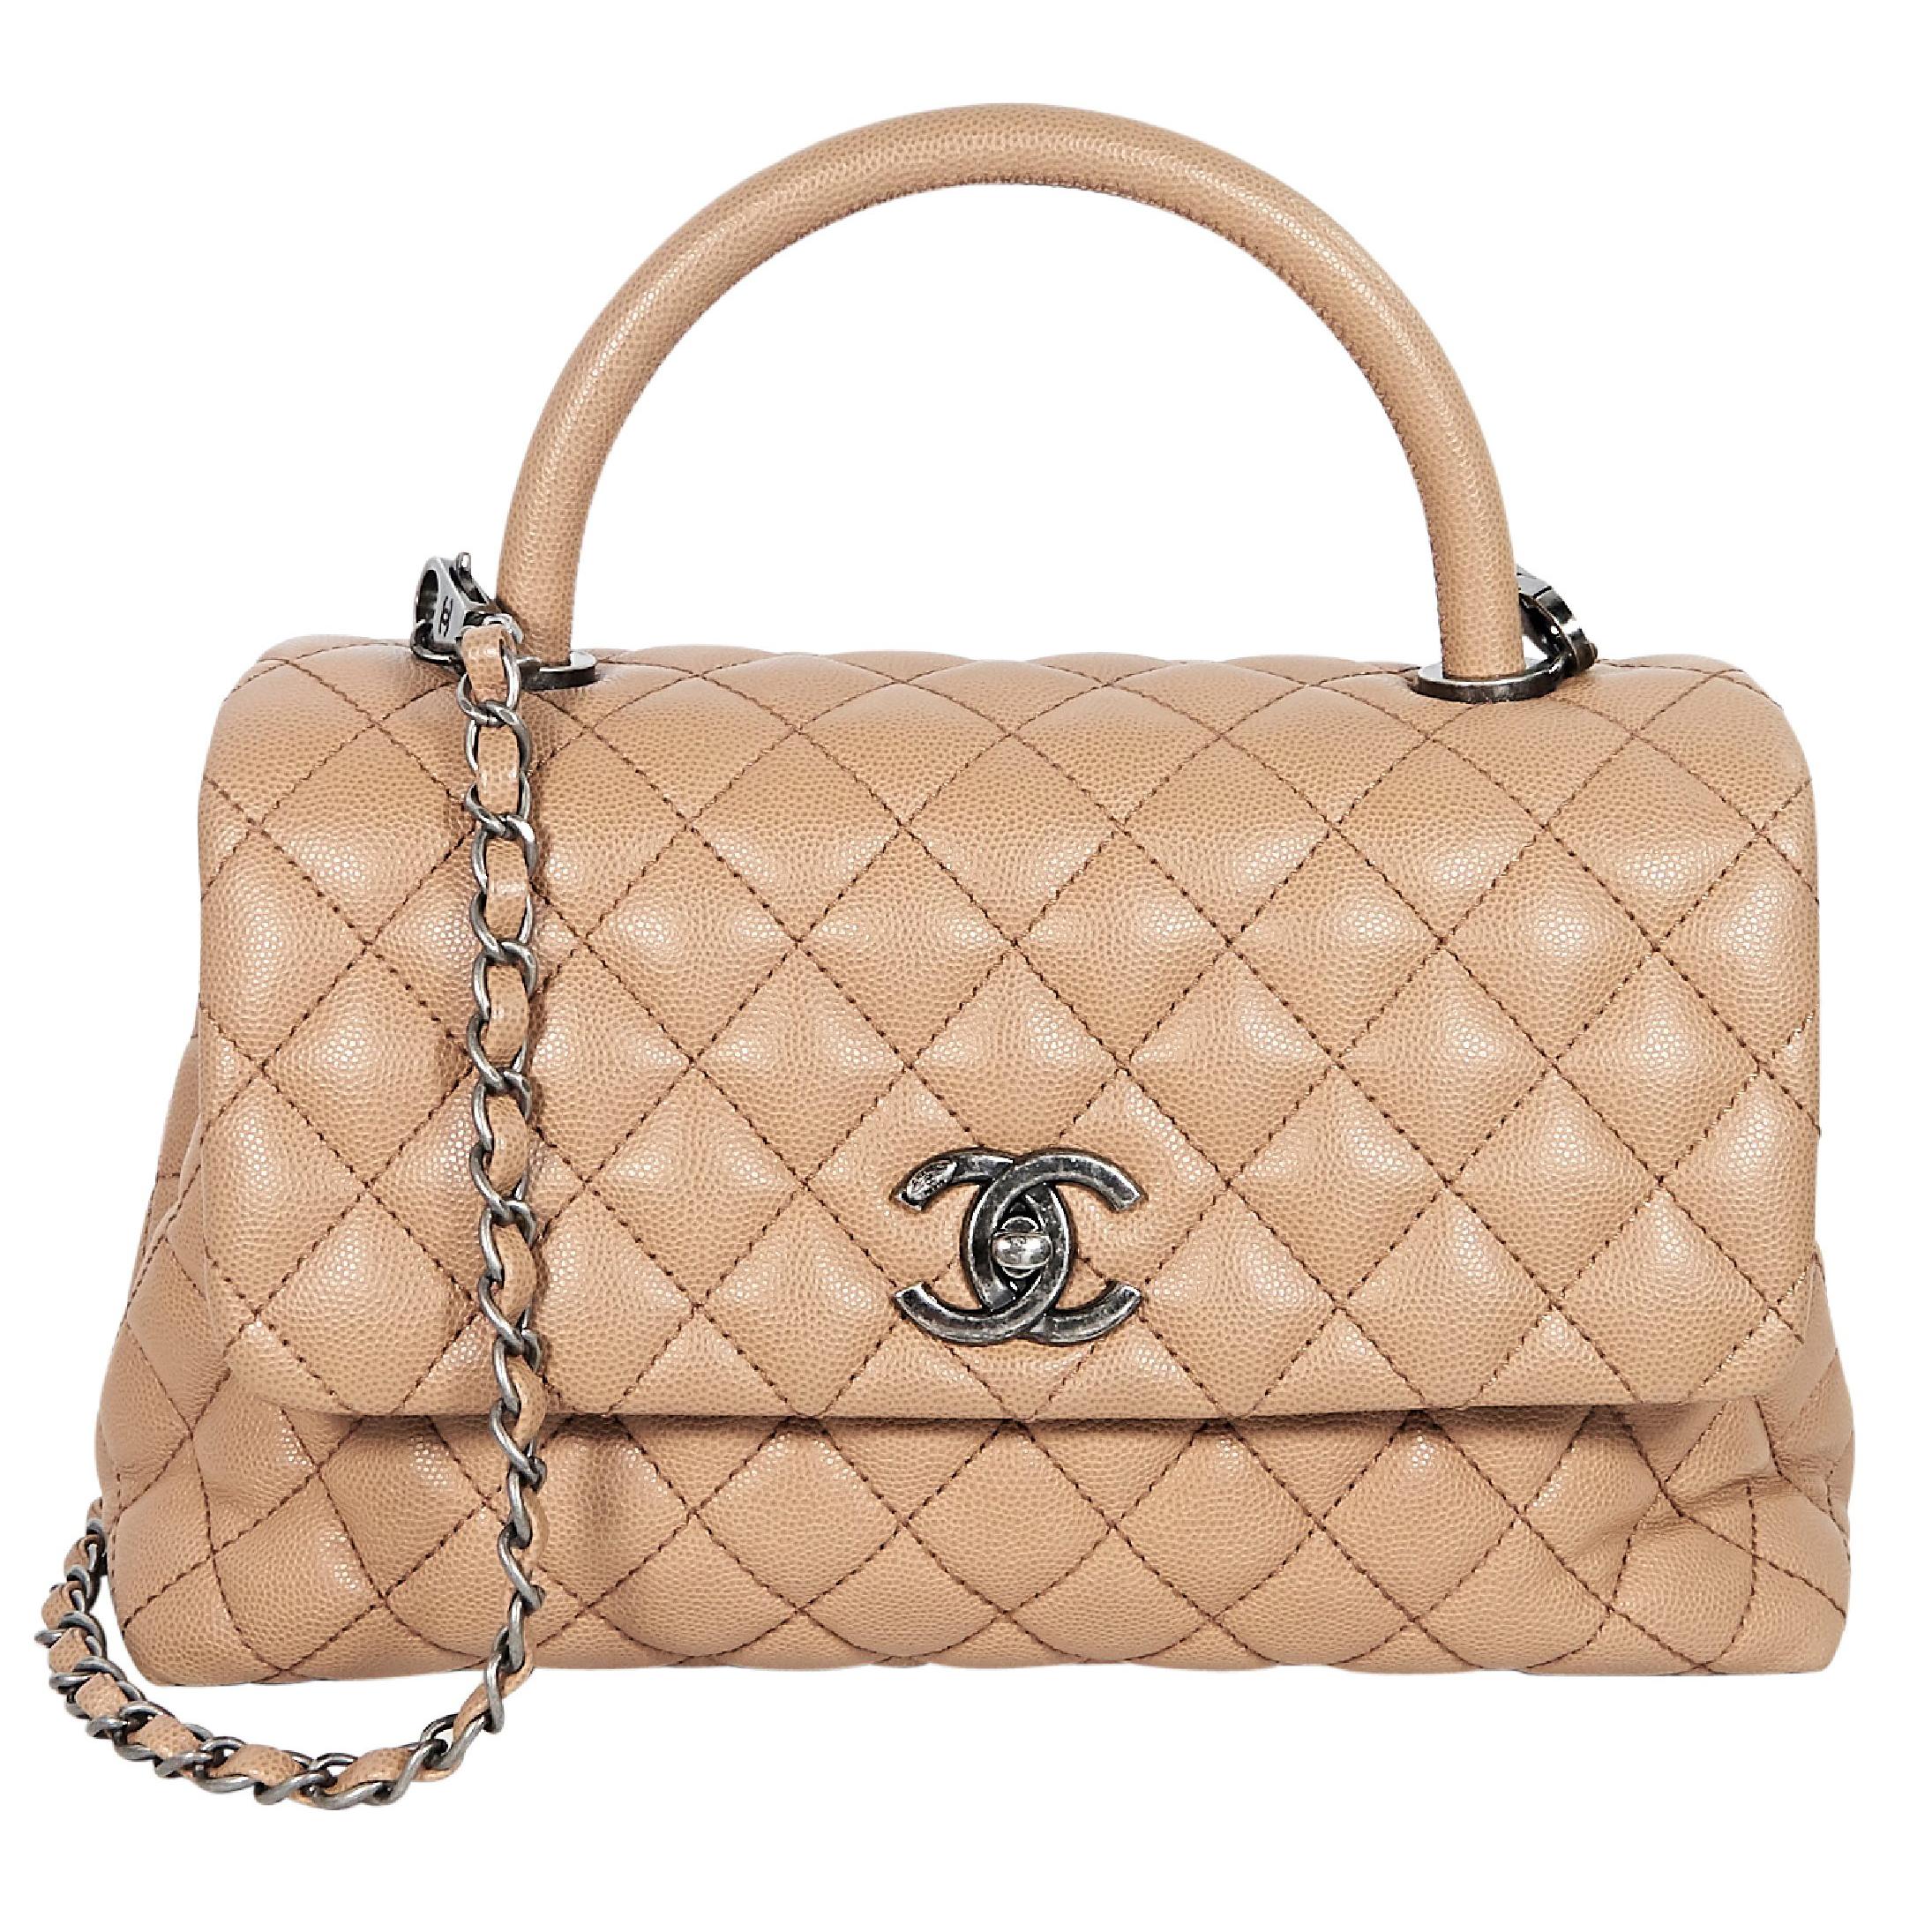 Tan Chanel Quilted Caviar Leather Satchel